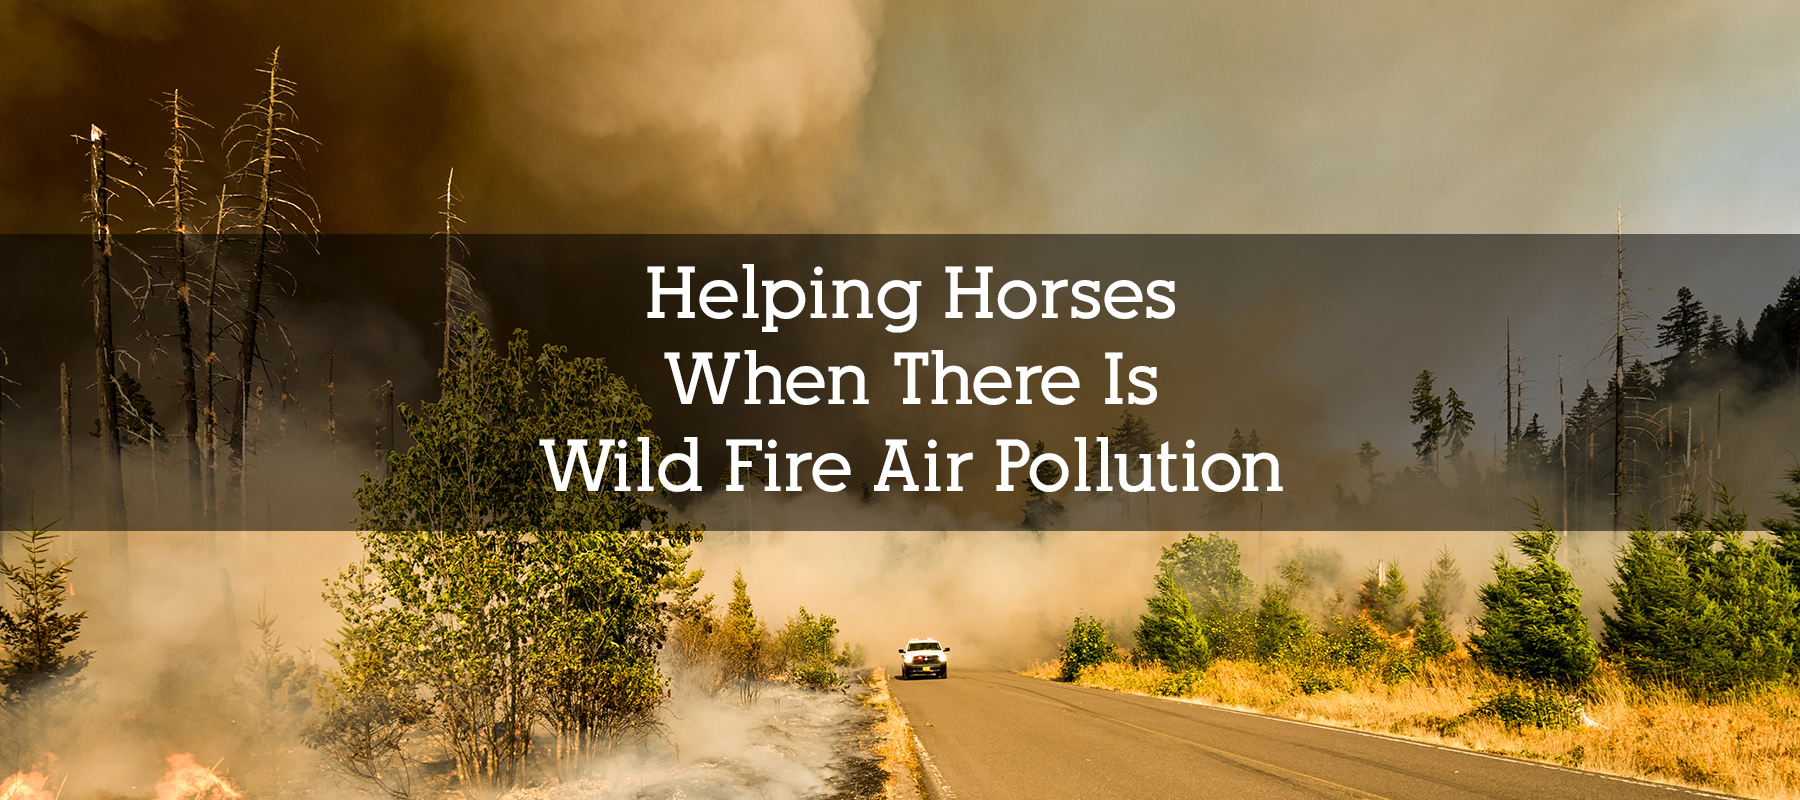 Helping Horses when there is Wild Fire Air Pollution